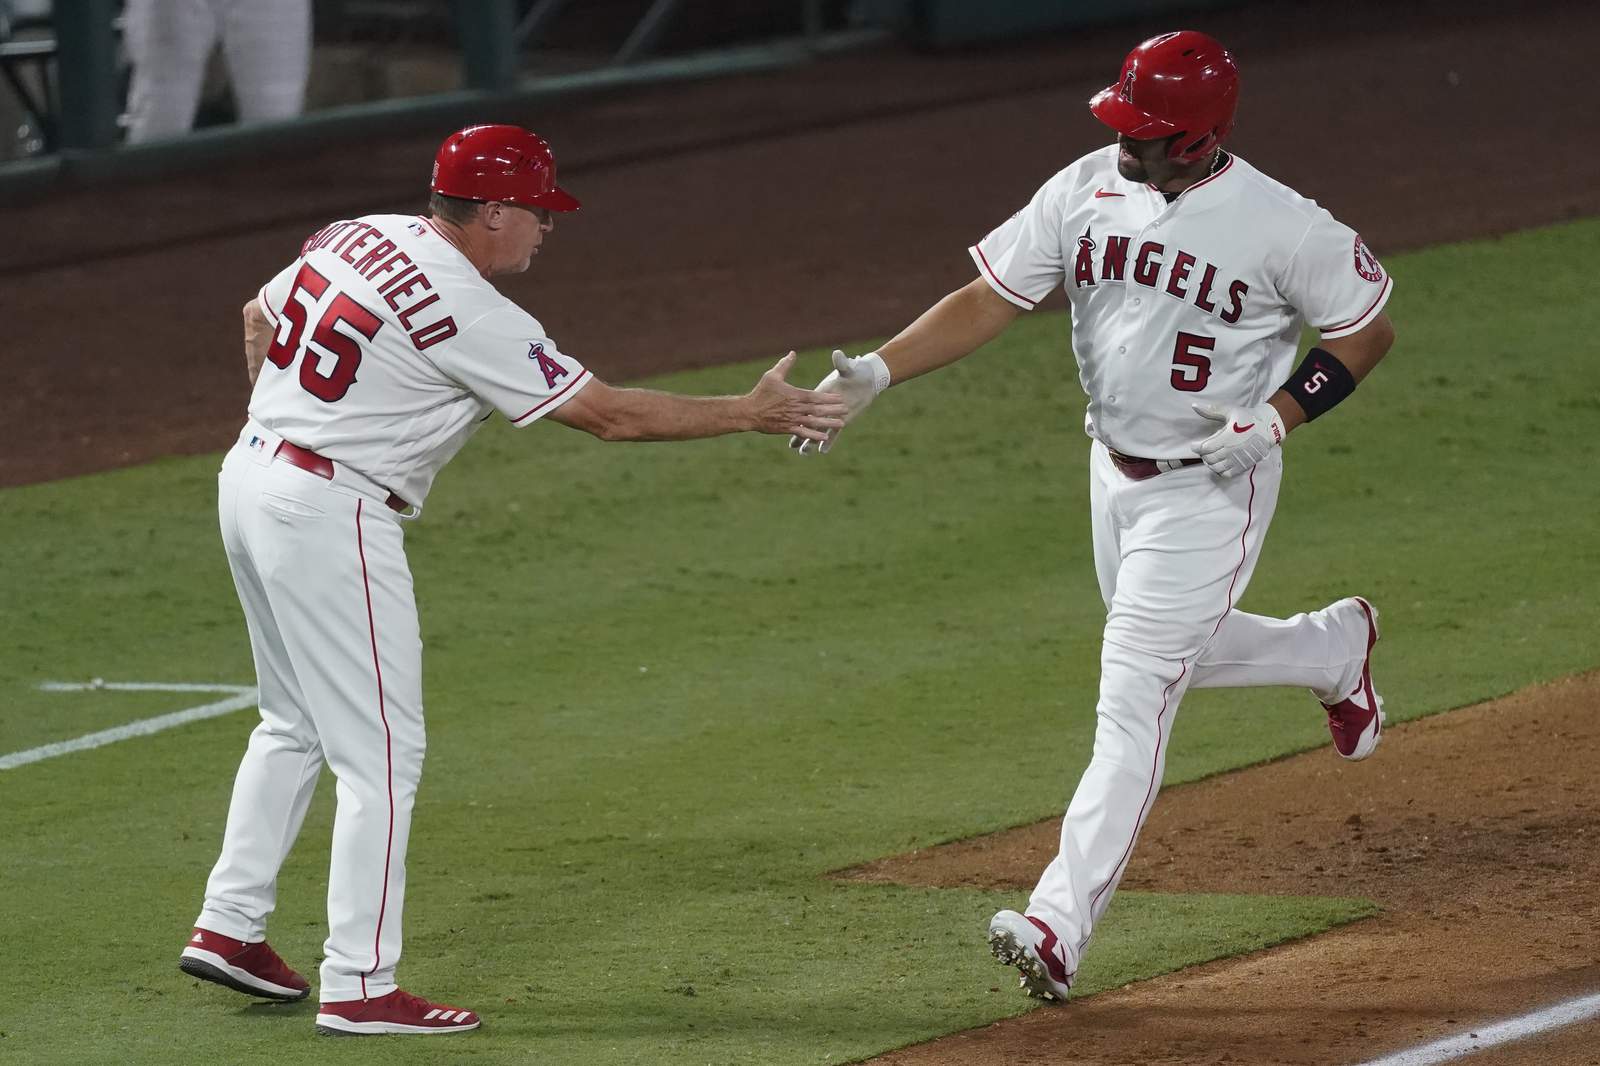 Pujols 2 HRs, passes Mays for 5th place, Angels beat Rangers